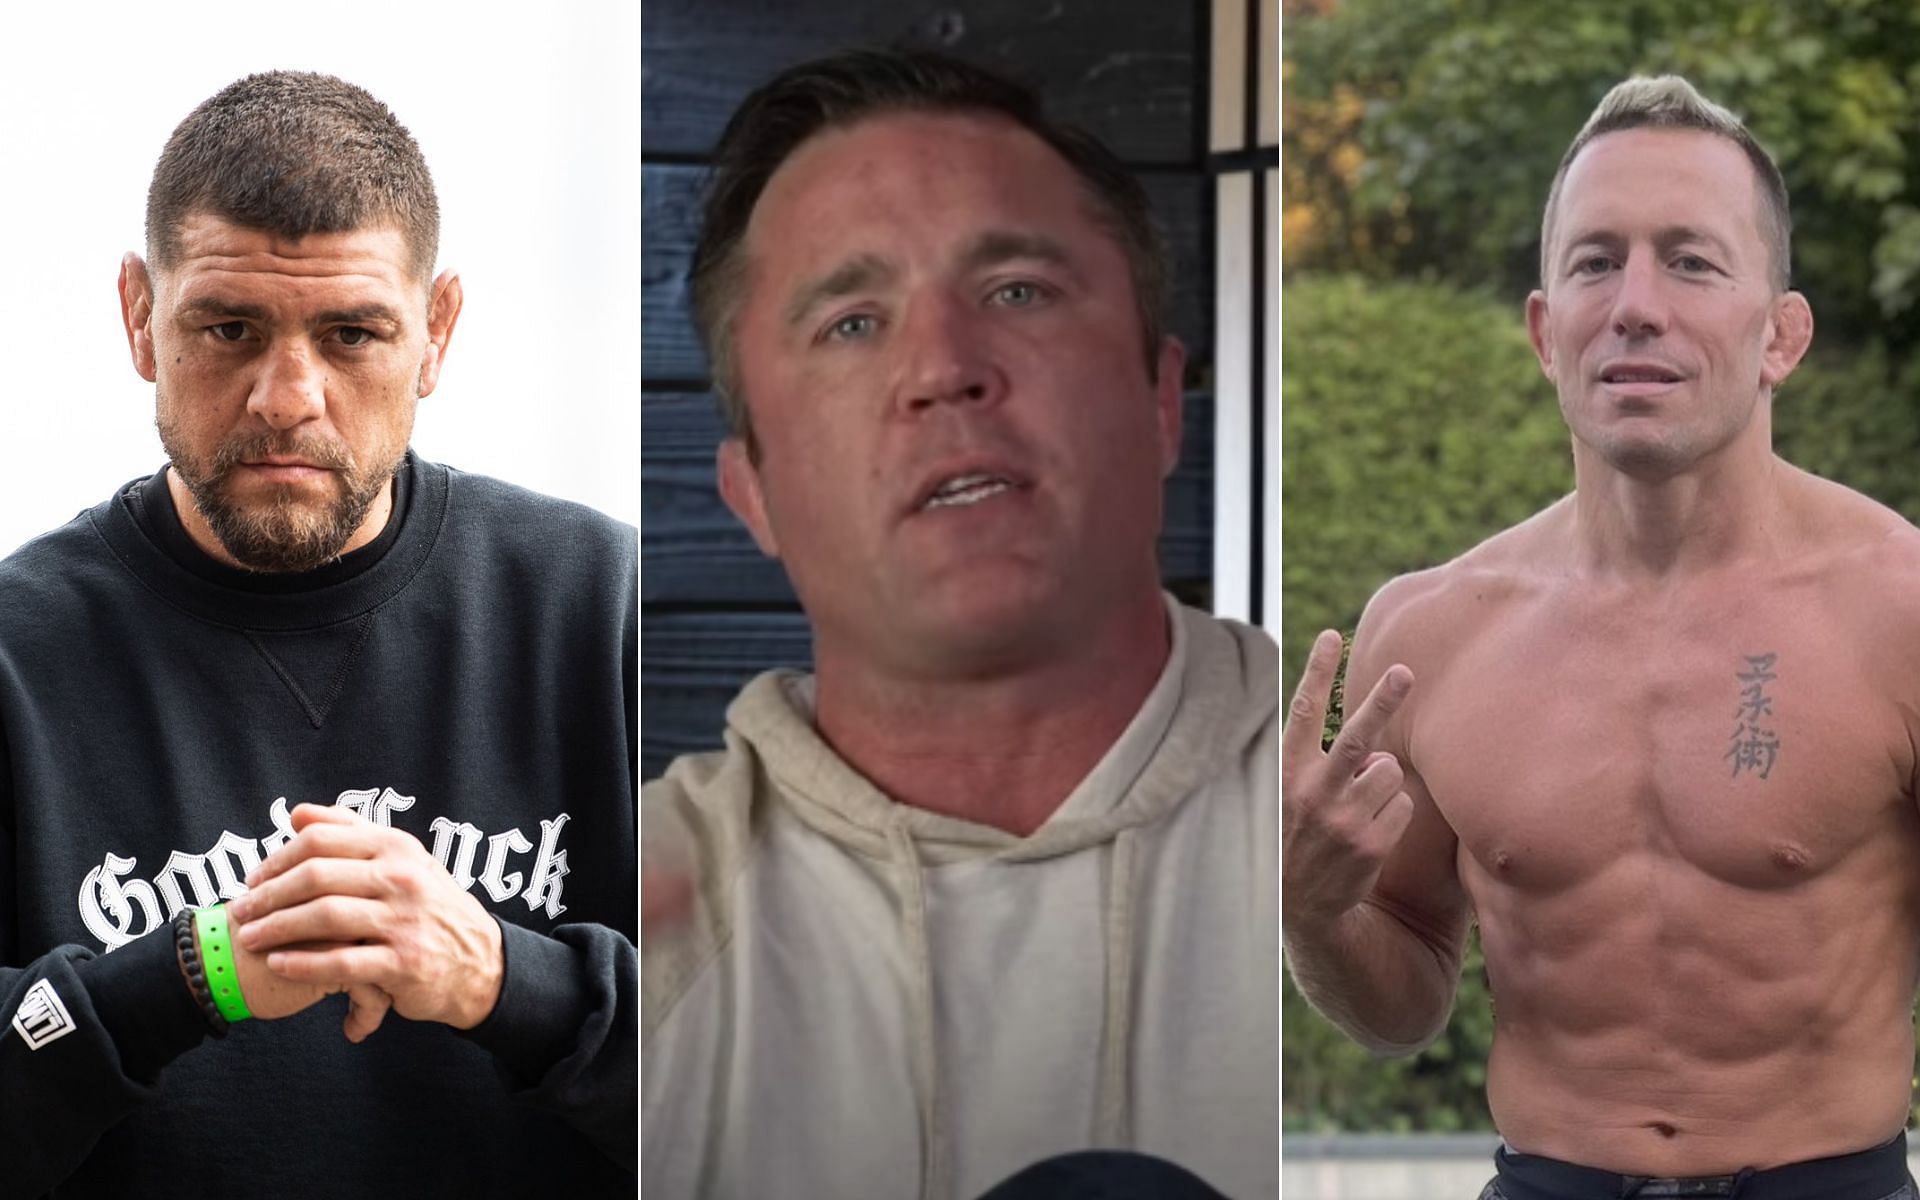 Nick Diaz [Left], Chael Sonnen [Middle], and Georges St-Pierre [Right] [Photo credit: @nickdiaz209 and @GeorgesStPierre - X, and Chael Sonnen - YouTube]